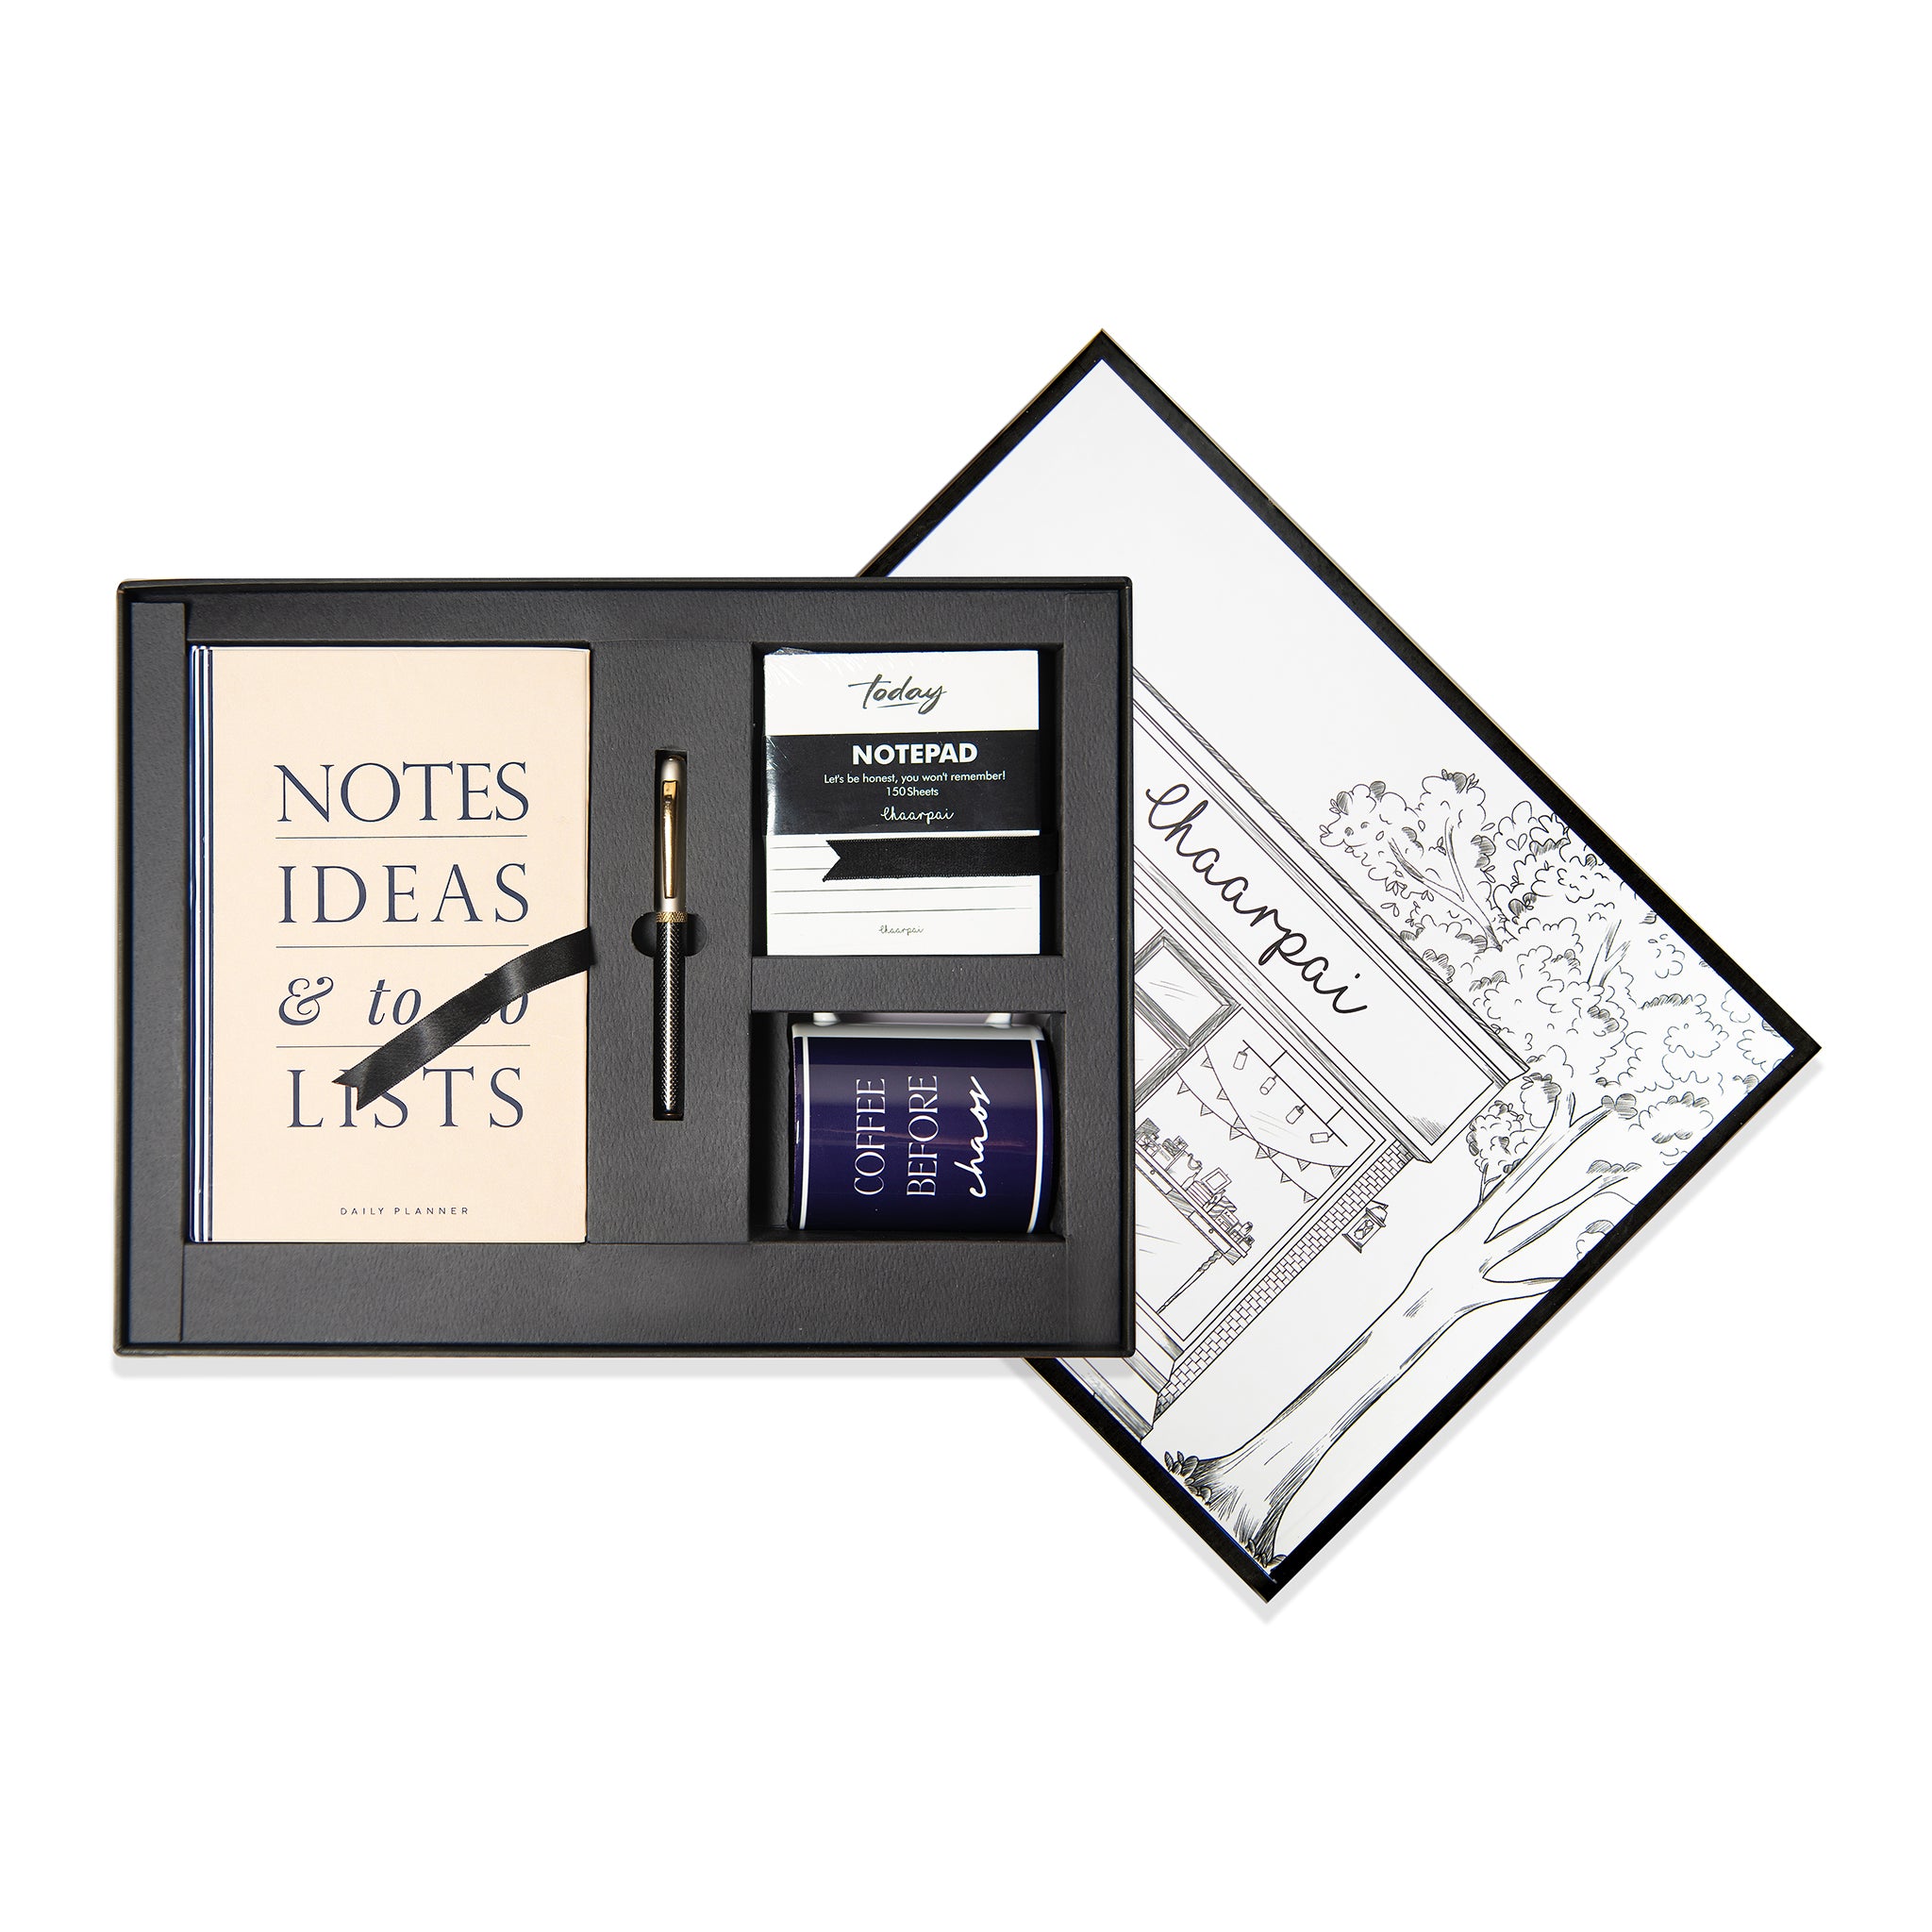 NOTES IDEAS & TO-DO-LISTS (CREAM) - GIFTSET